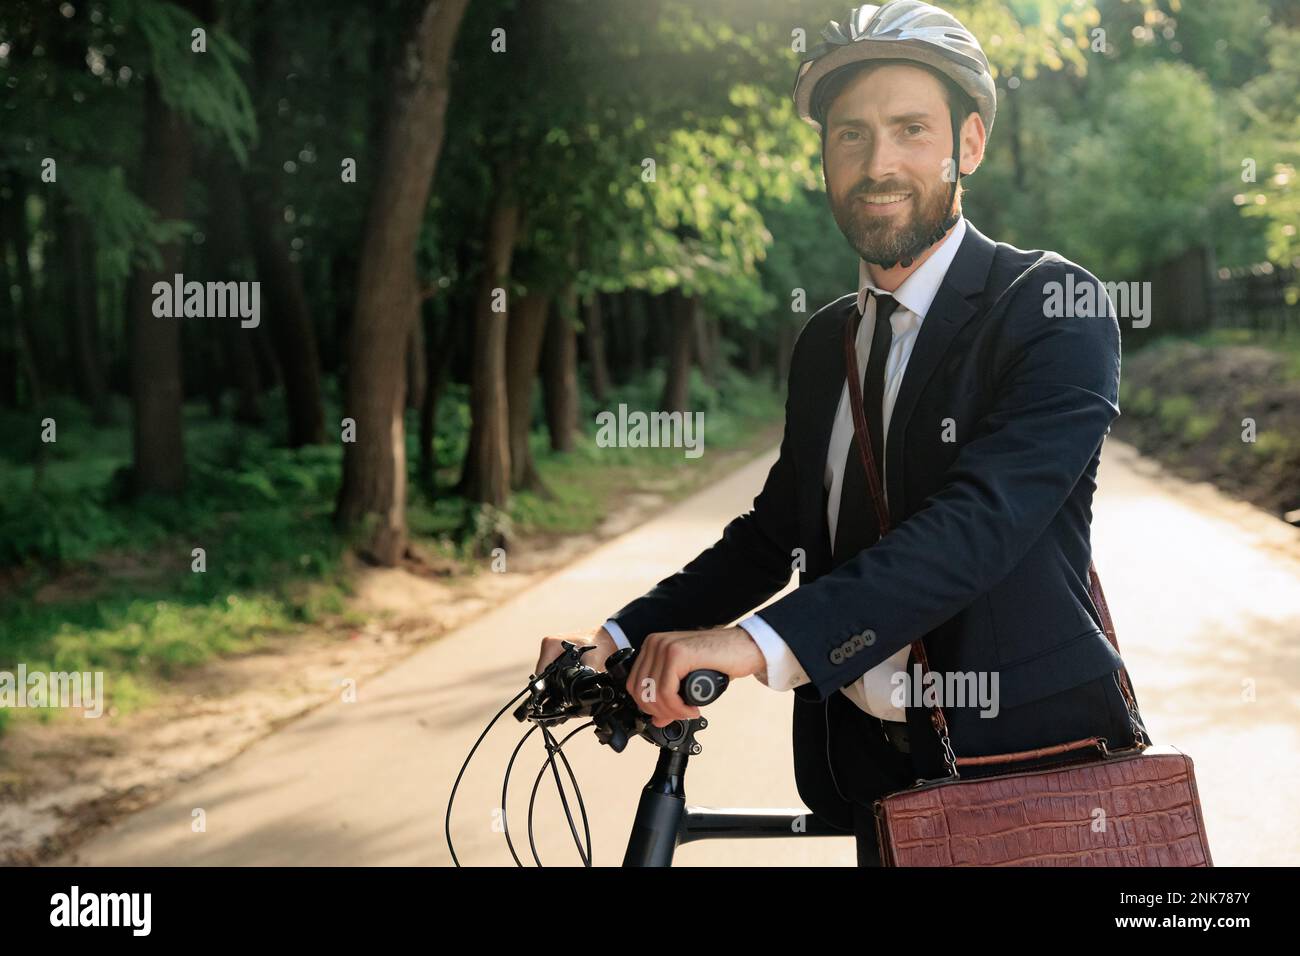 Confident businessman in helmet walking to work with bicycle in morning. Portrait of bearded entrepreneur in stylish suit standing with bike, while lo Stock Photo